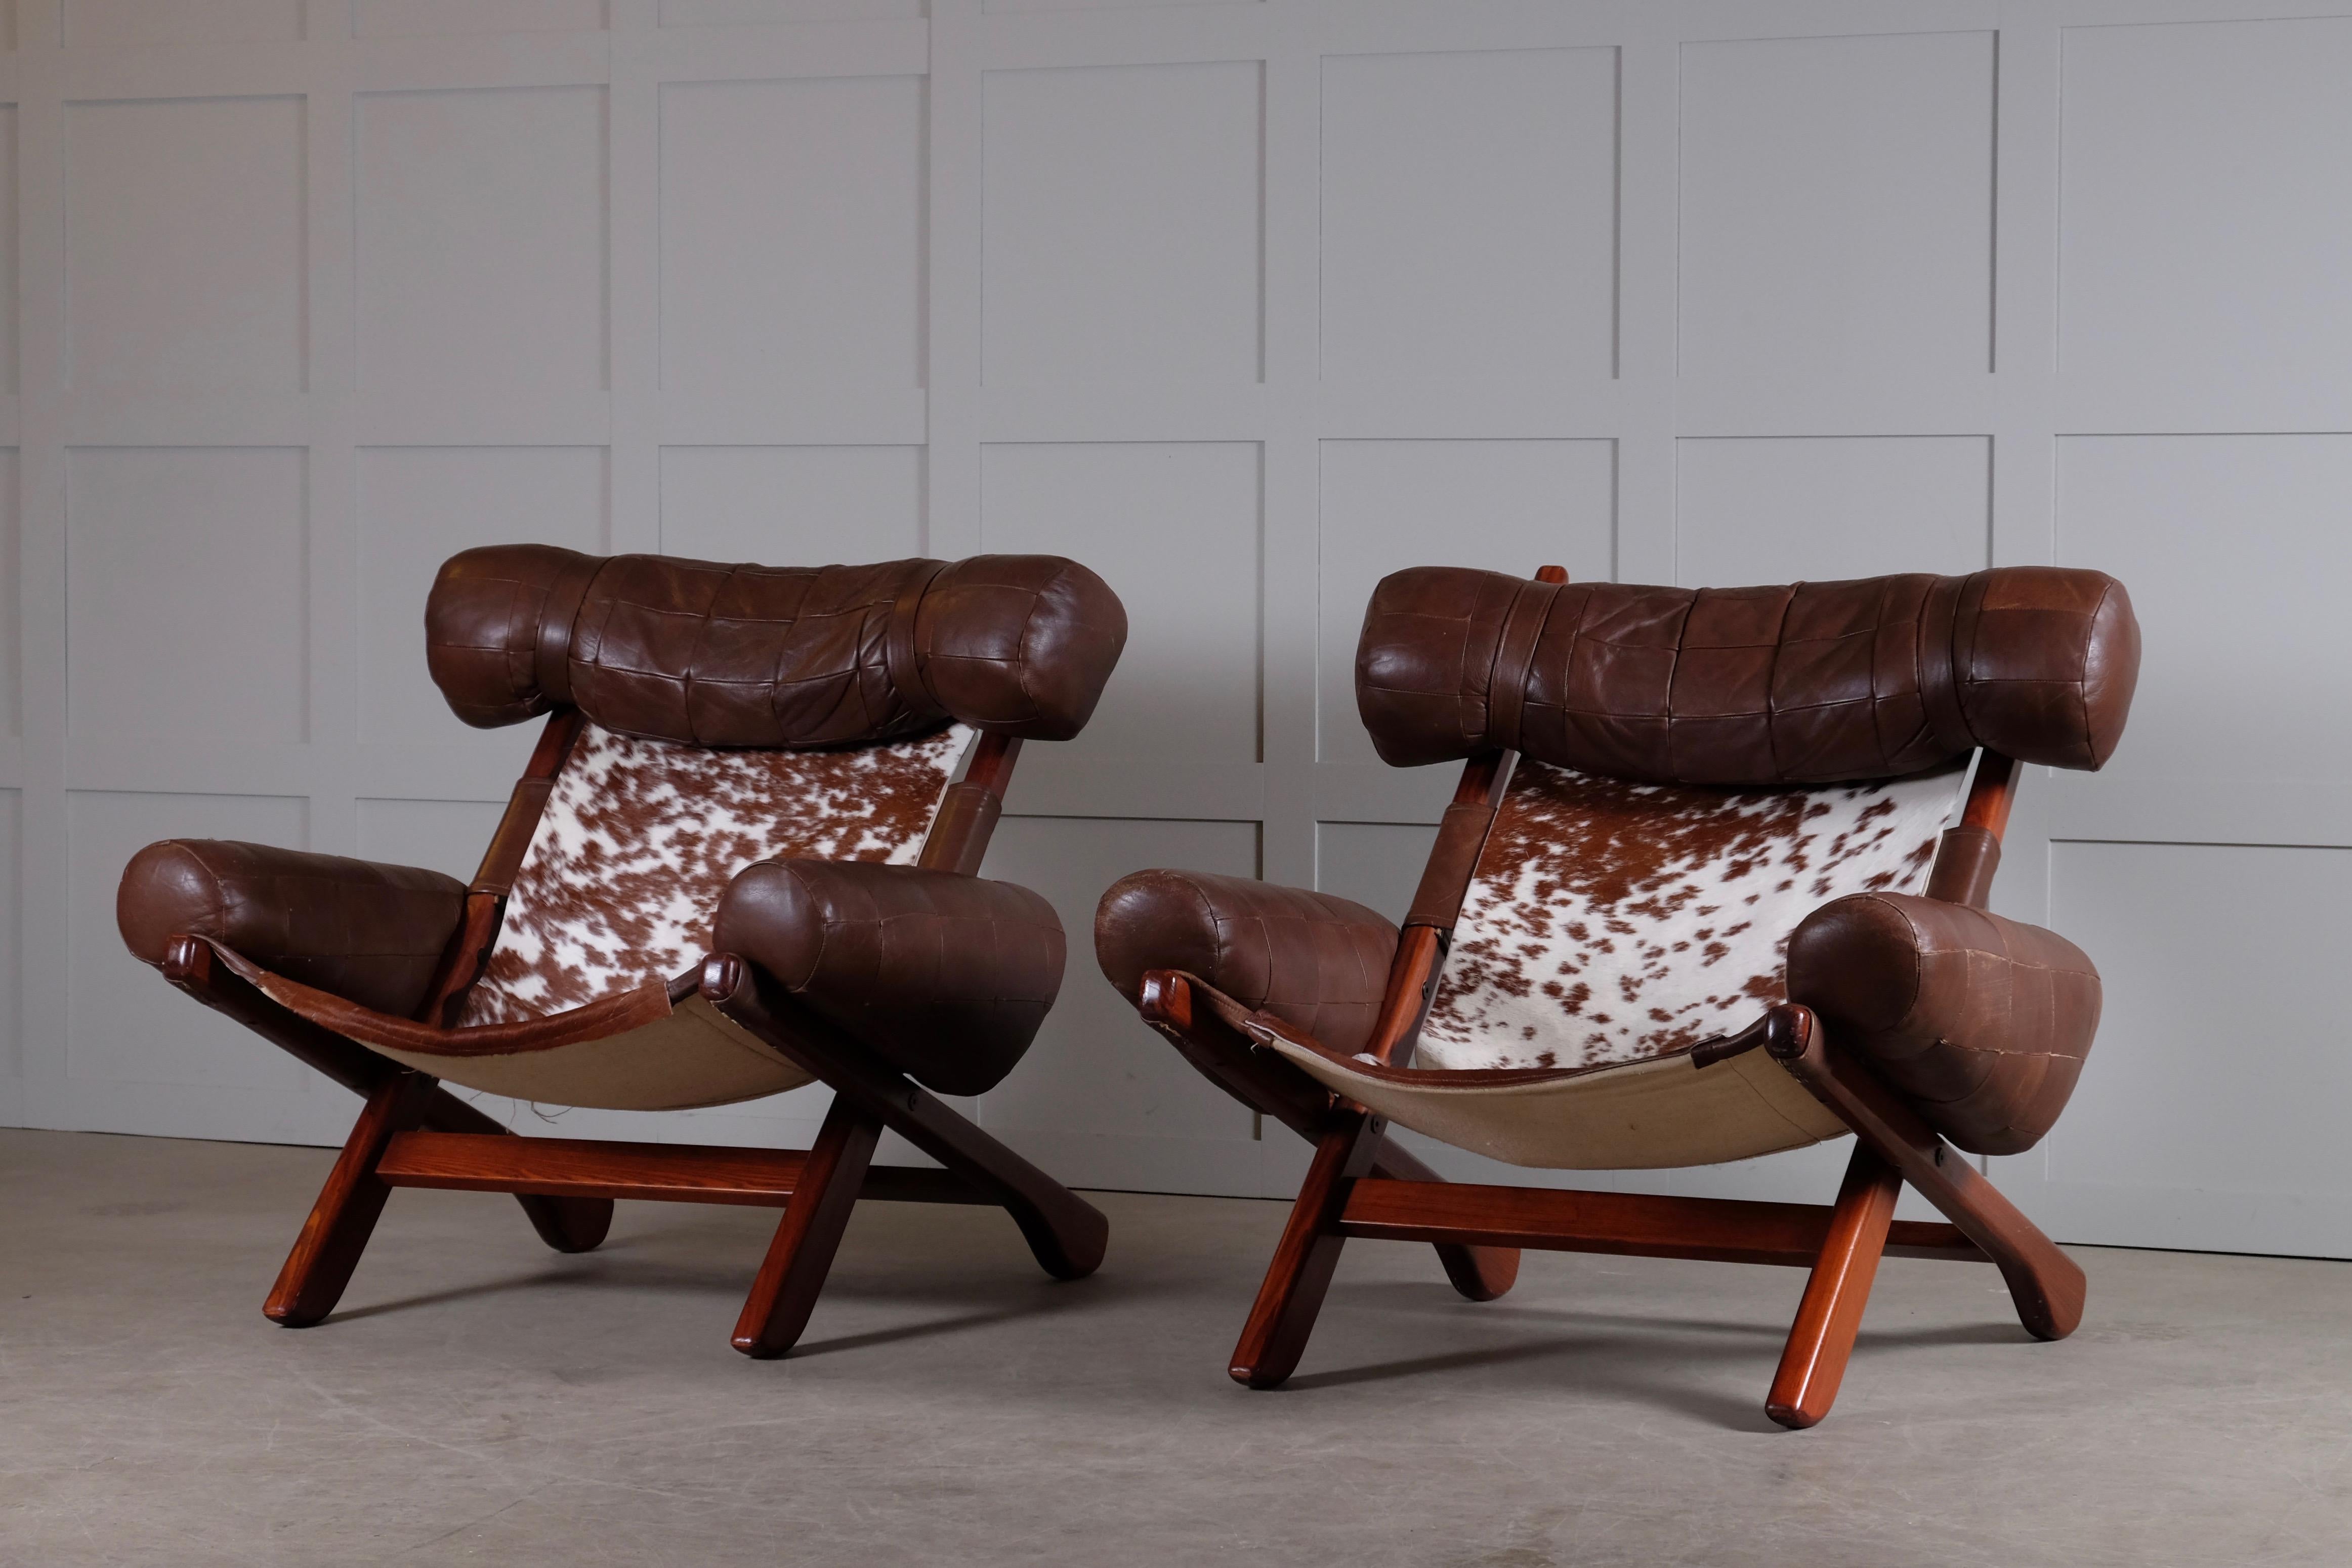 Produced in Sweden, 1970s. Attributed to Arne Norell.
Dark stained beech and leather.